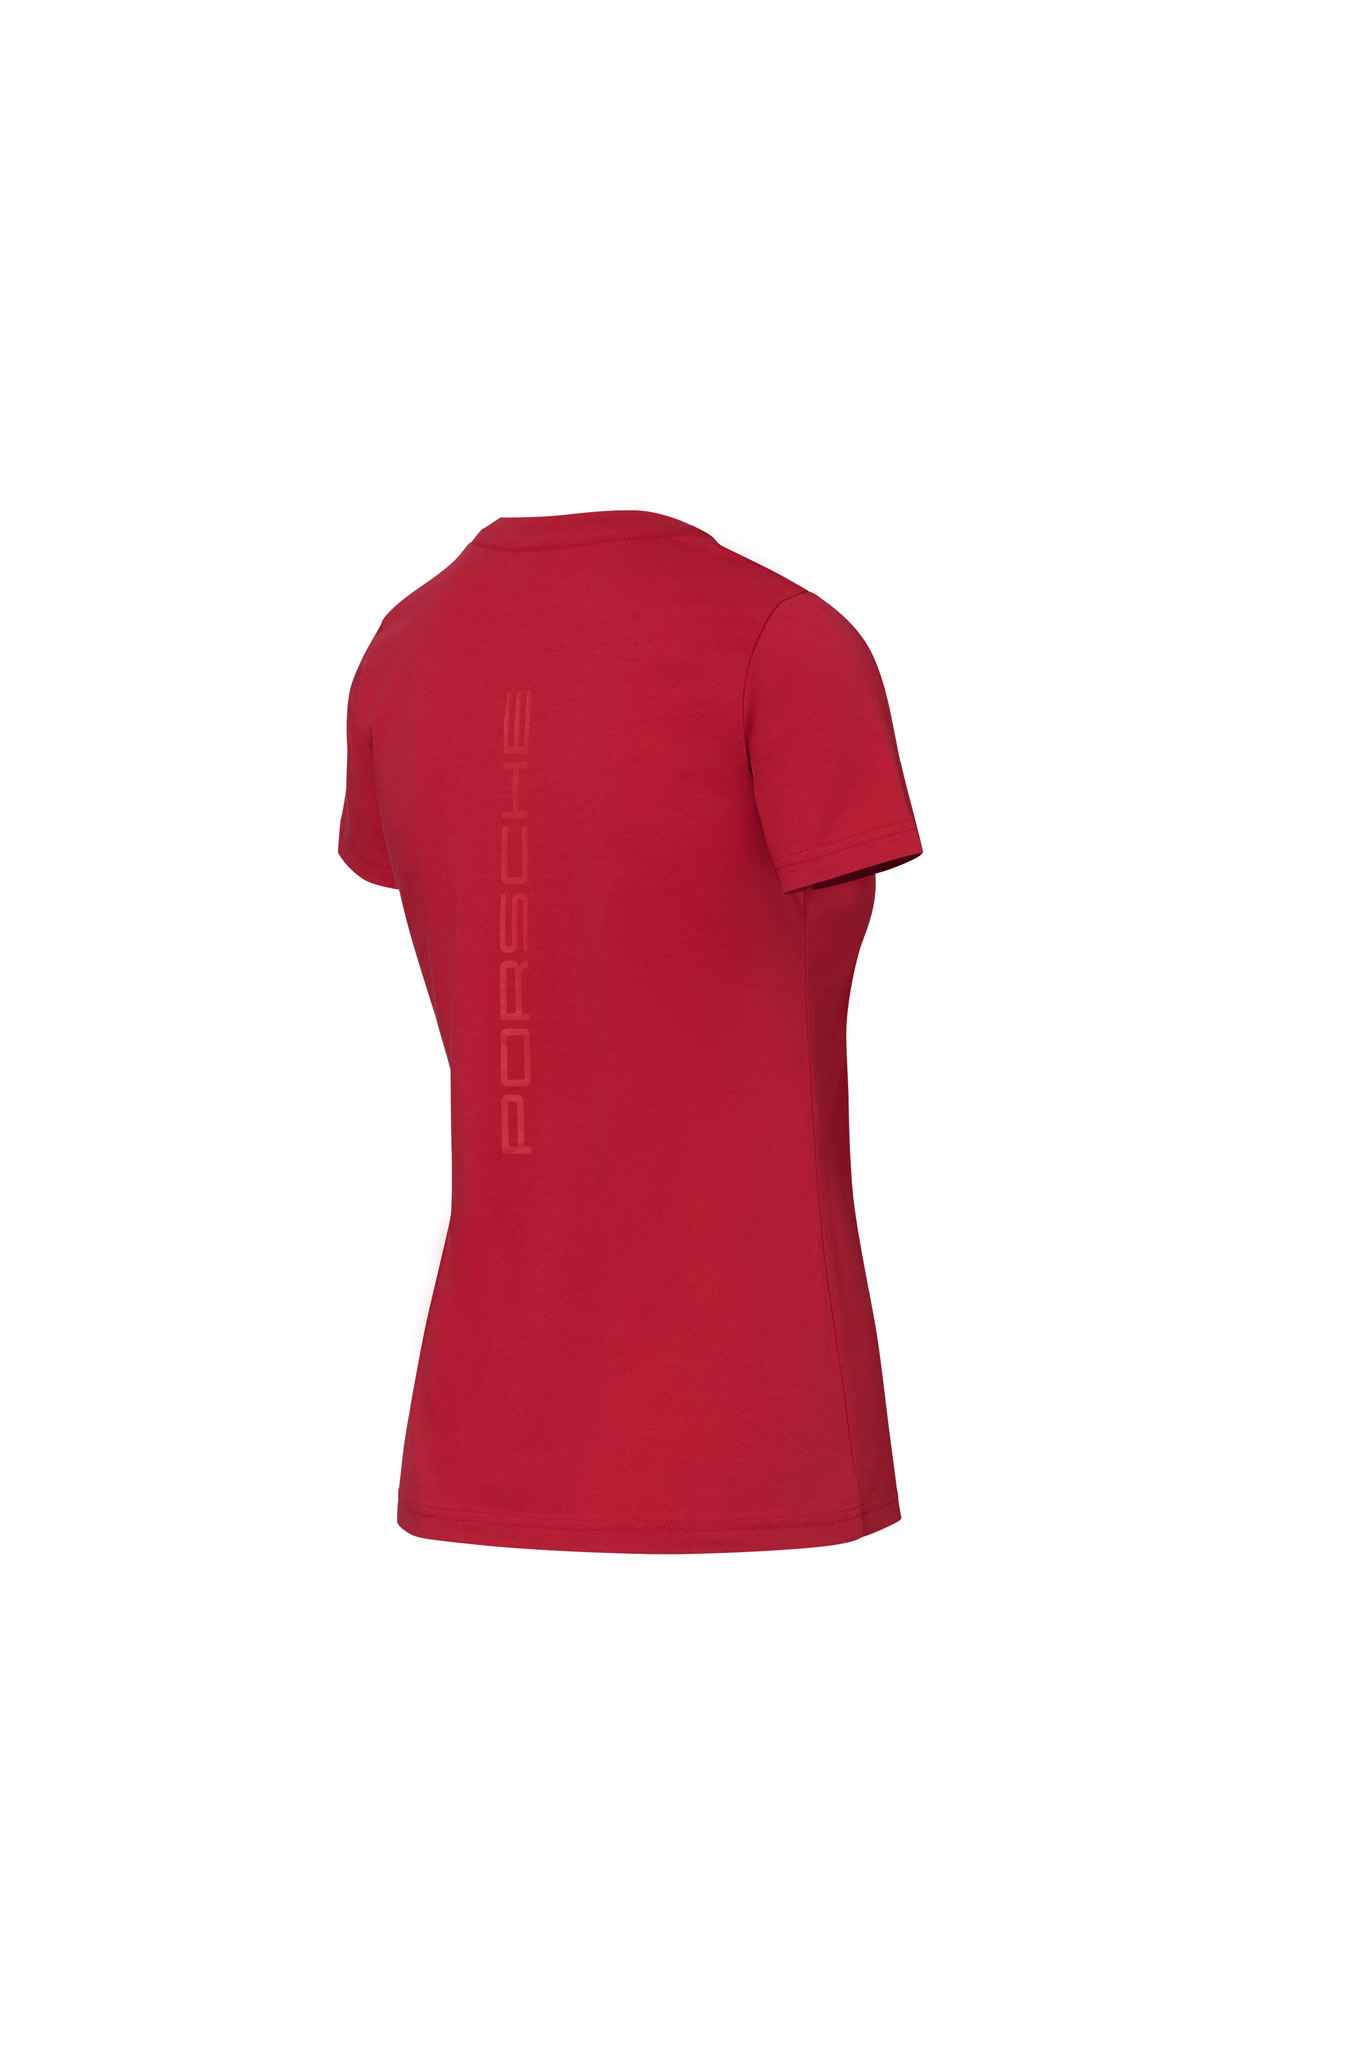 Motorsport Fanwear Collection, Women's Red T-Shirt photo(1) 